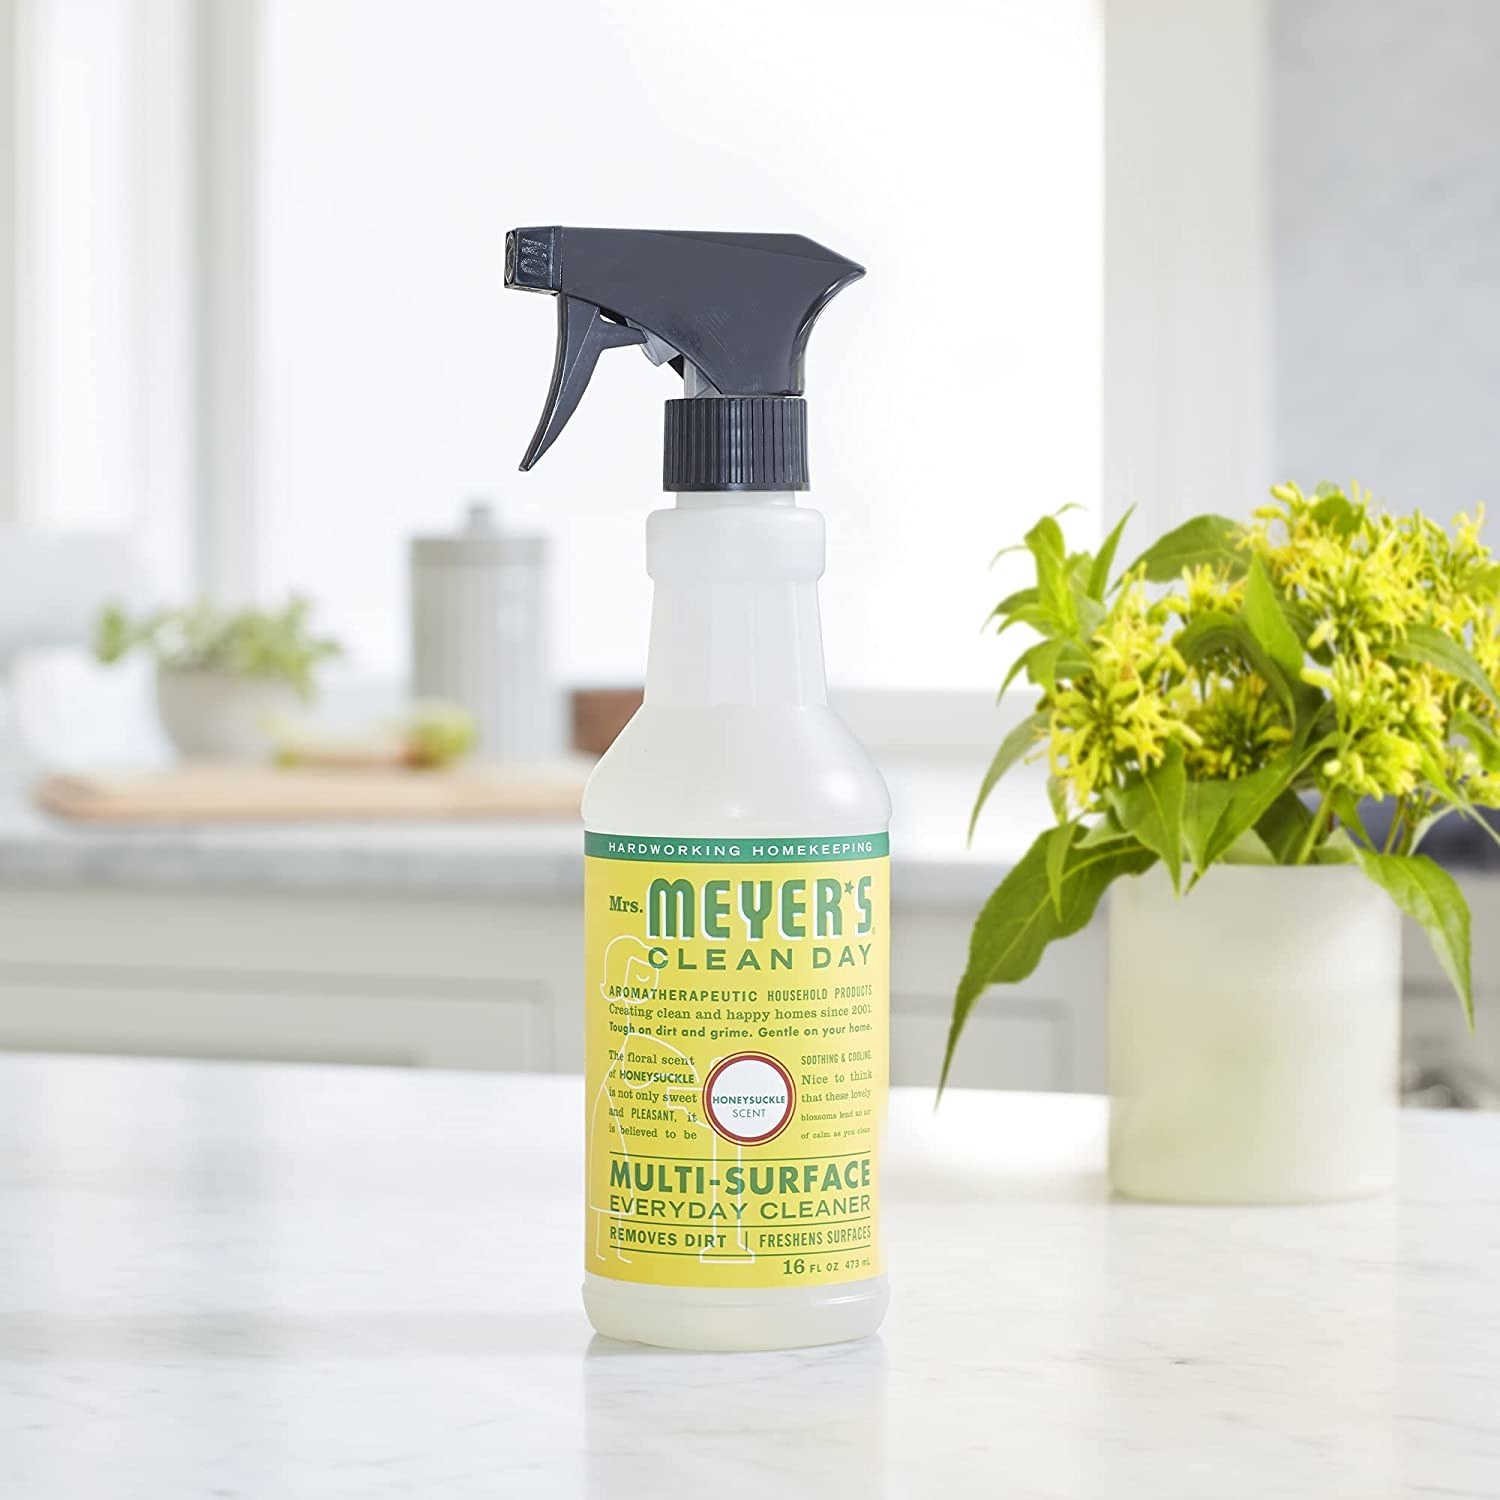 The multi-surface cleanser on a countertop